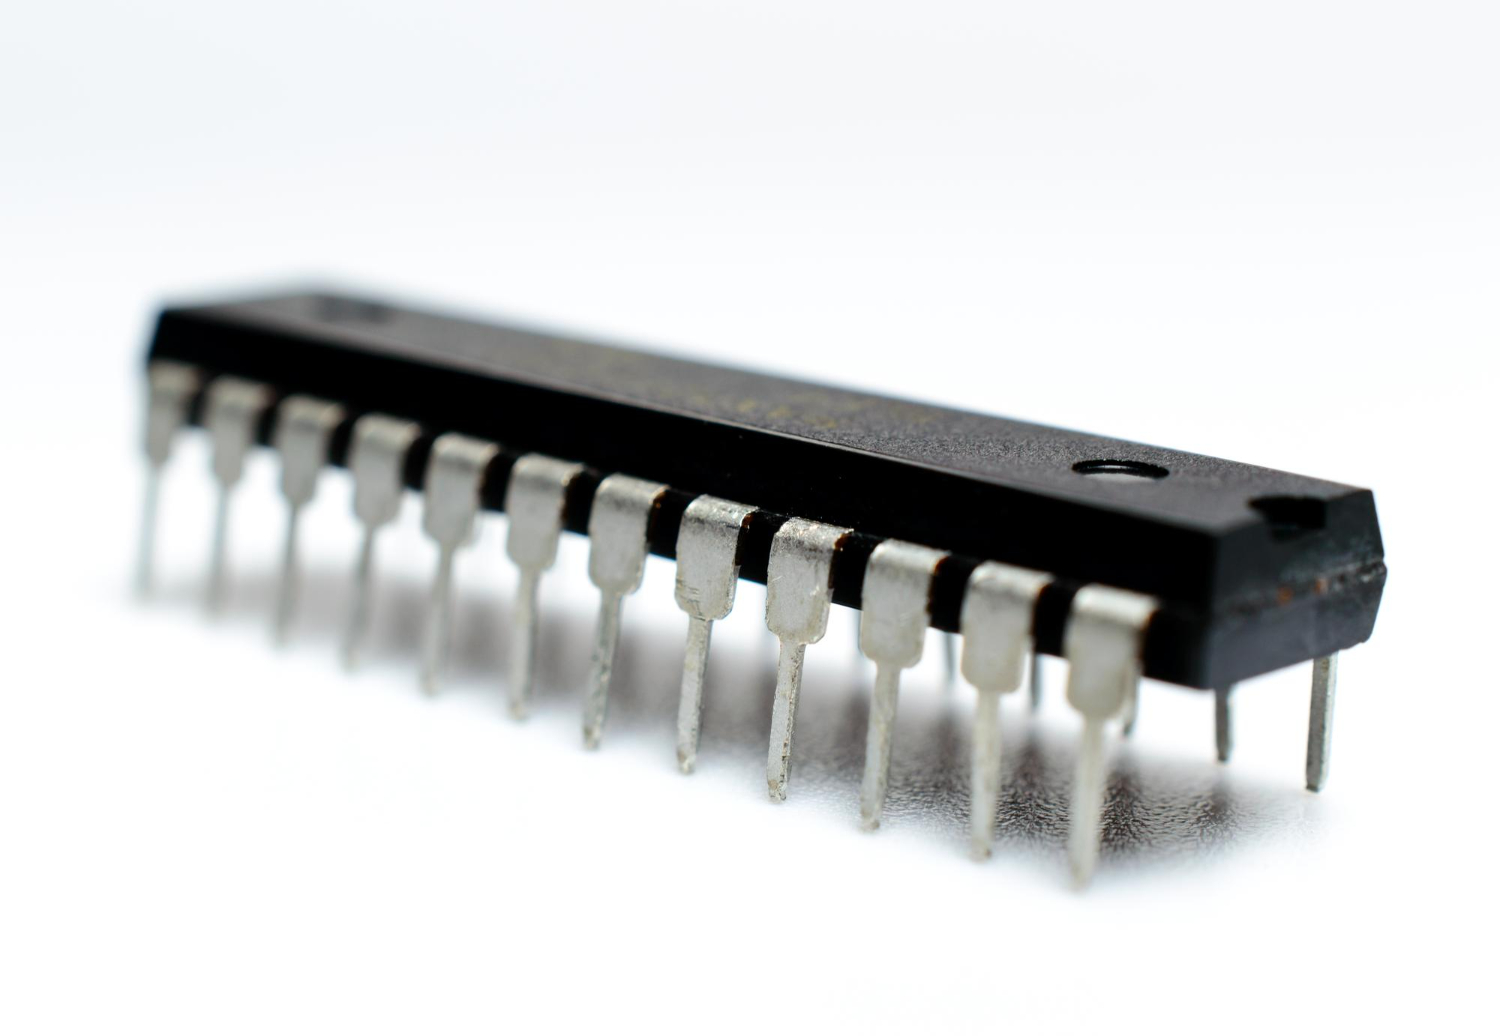 black-microchip-with-metal-legs-white-background-microcircuit-silicon-chip-macro-photo